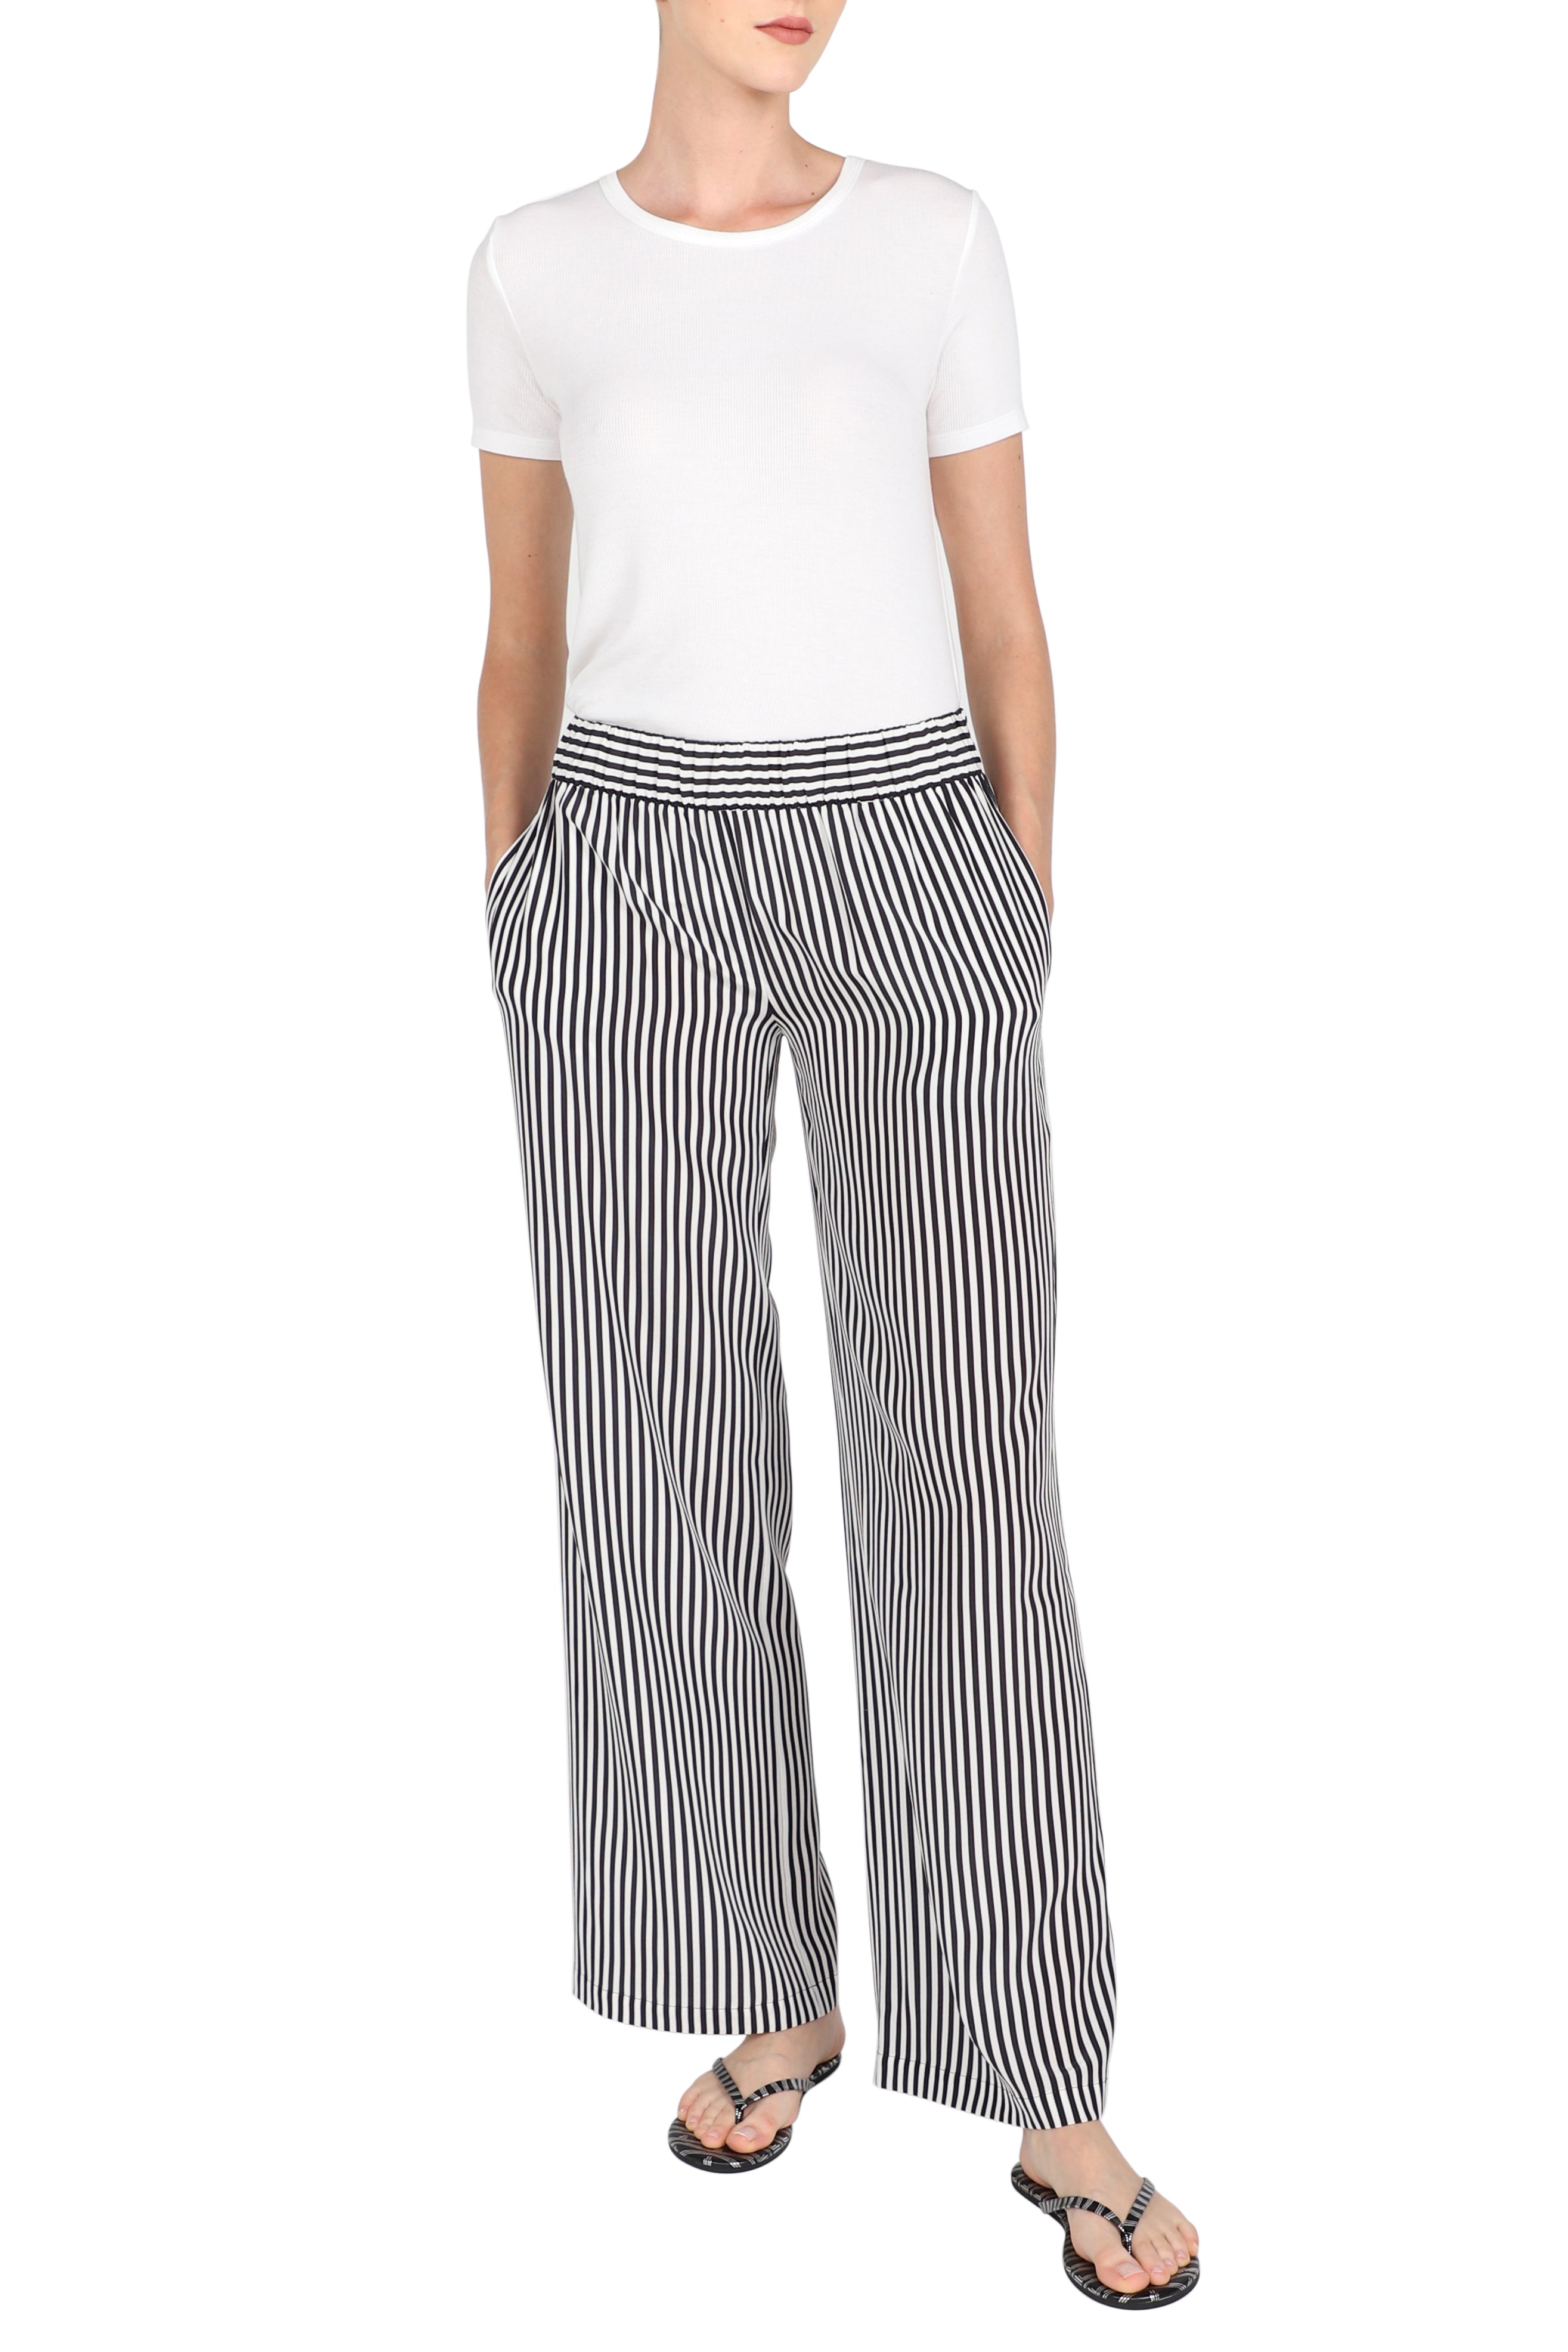 Office  You Bottoms Pants and Trousers  Buy Office  You Black Stripe  Crepe Pant OnlineNykaa Fashion